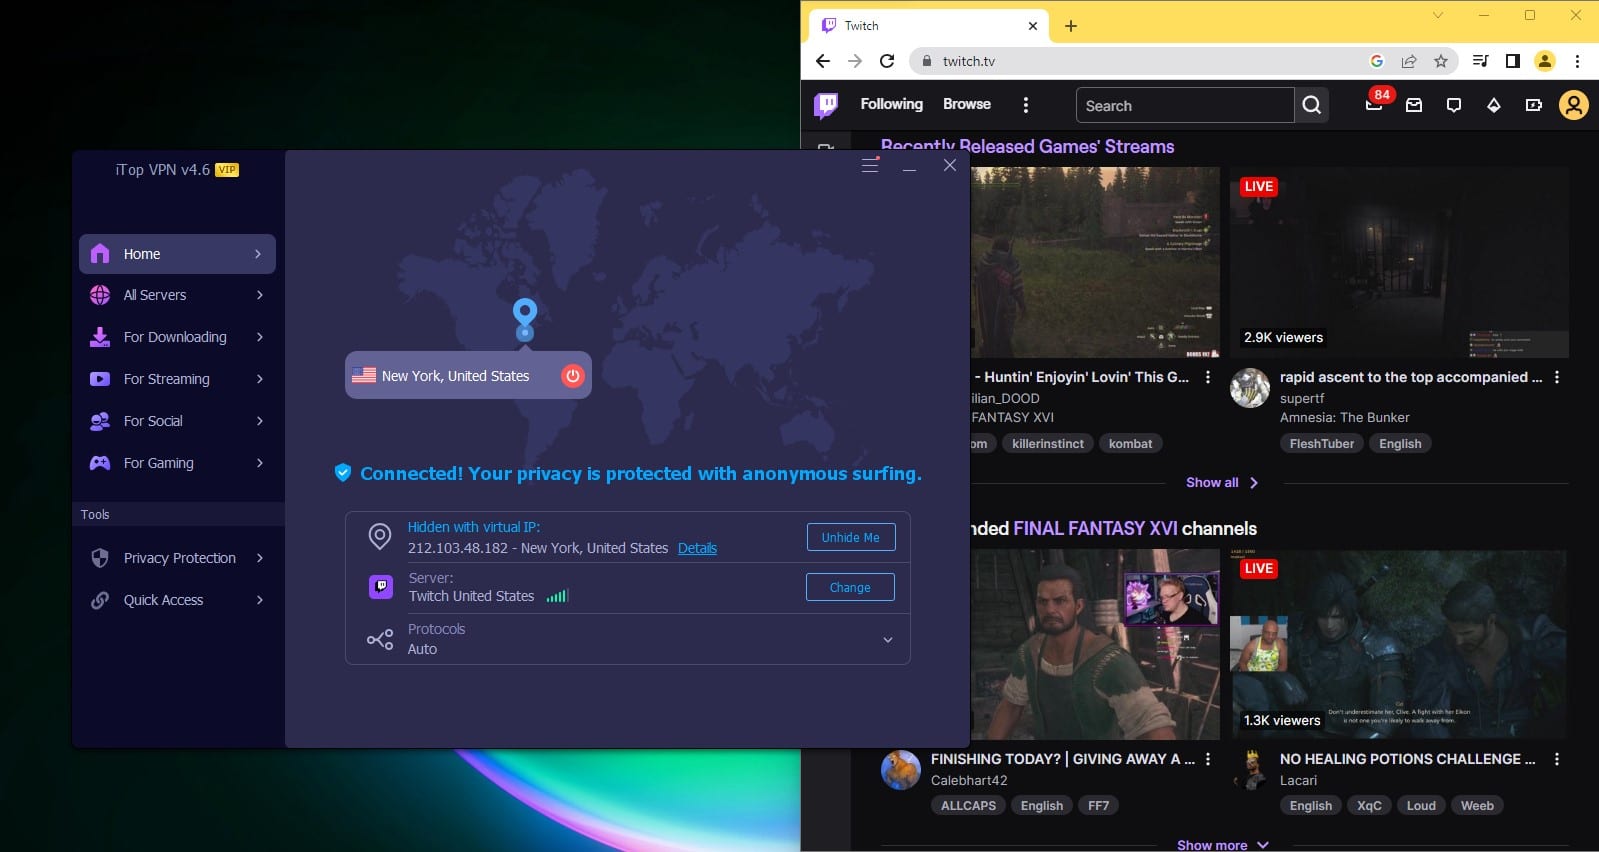 connecting-with-twitch-servers-itop-vpn